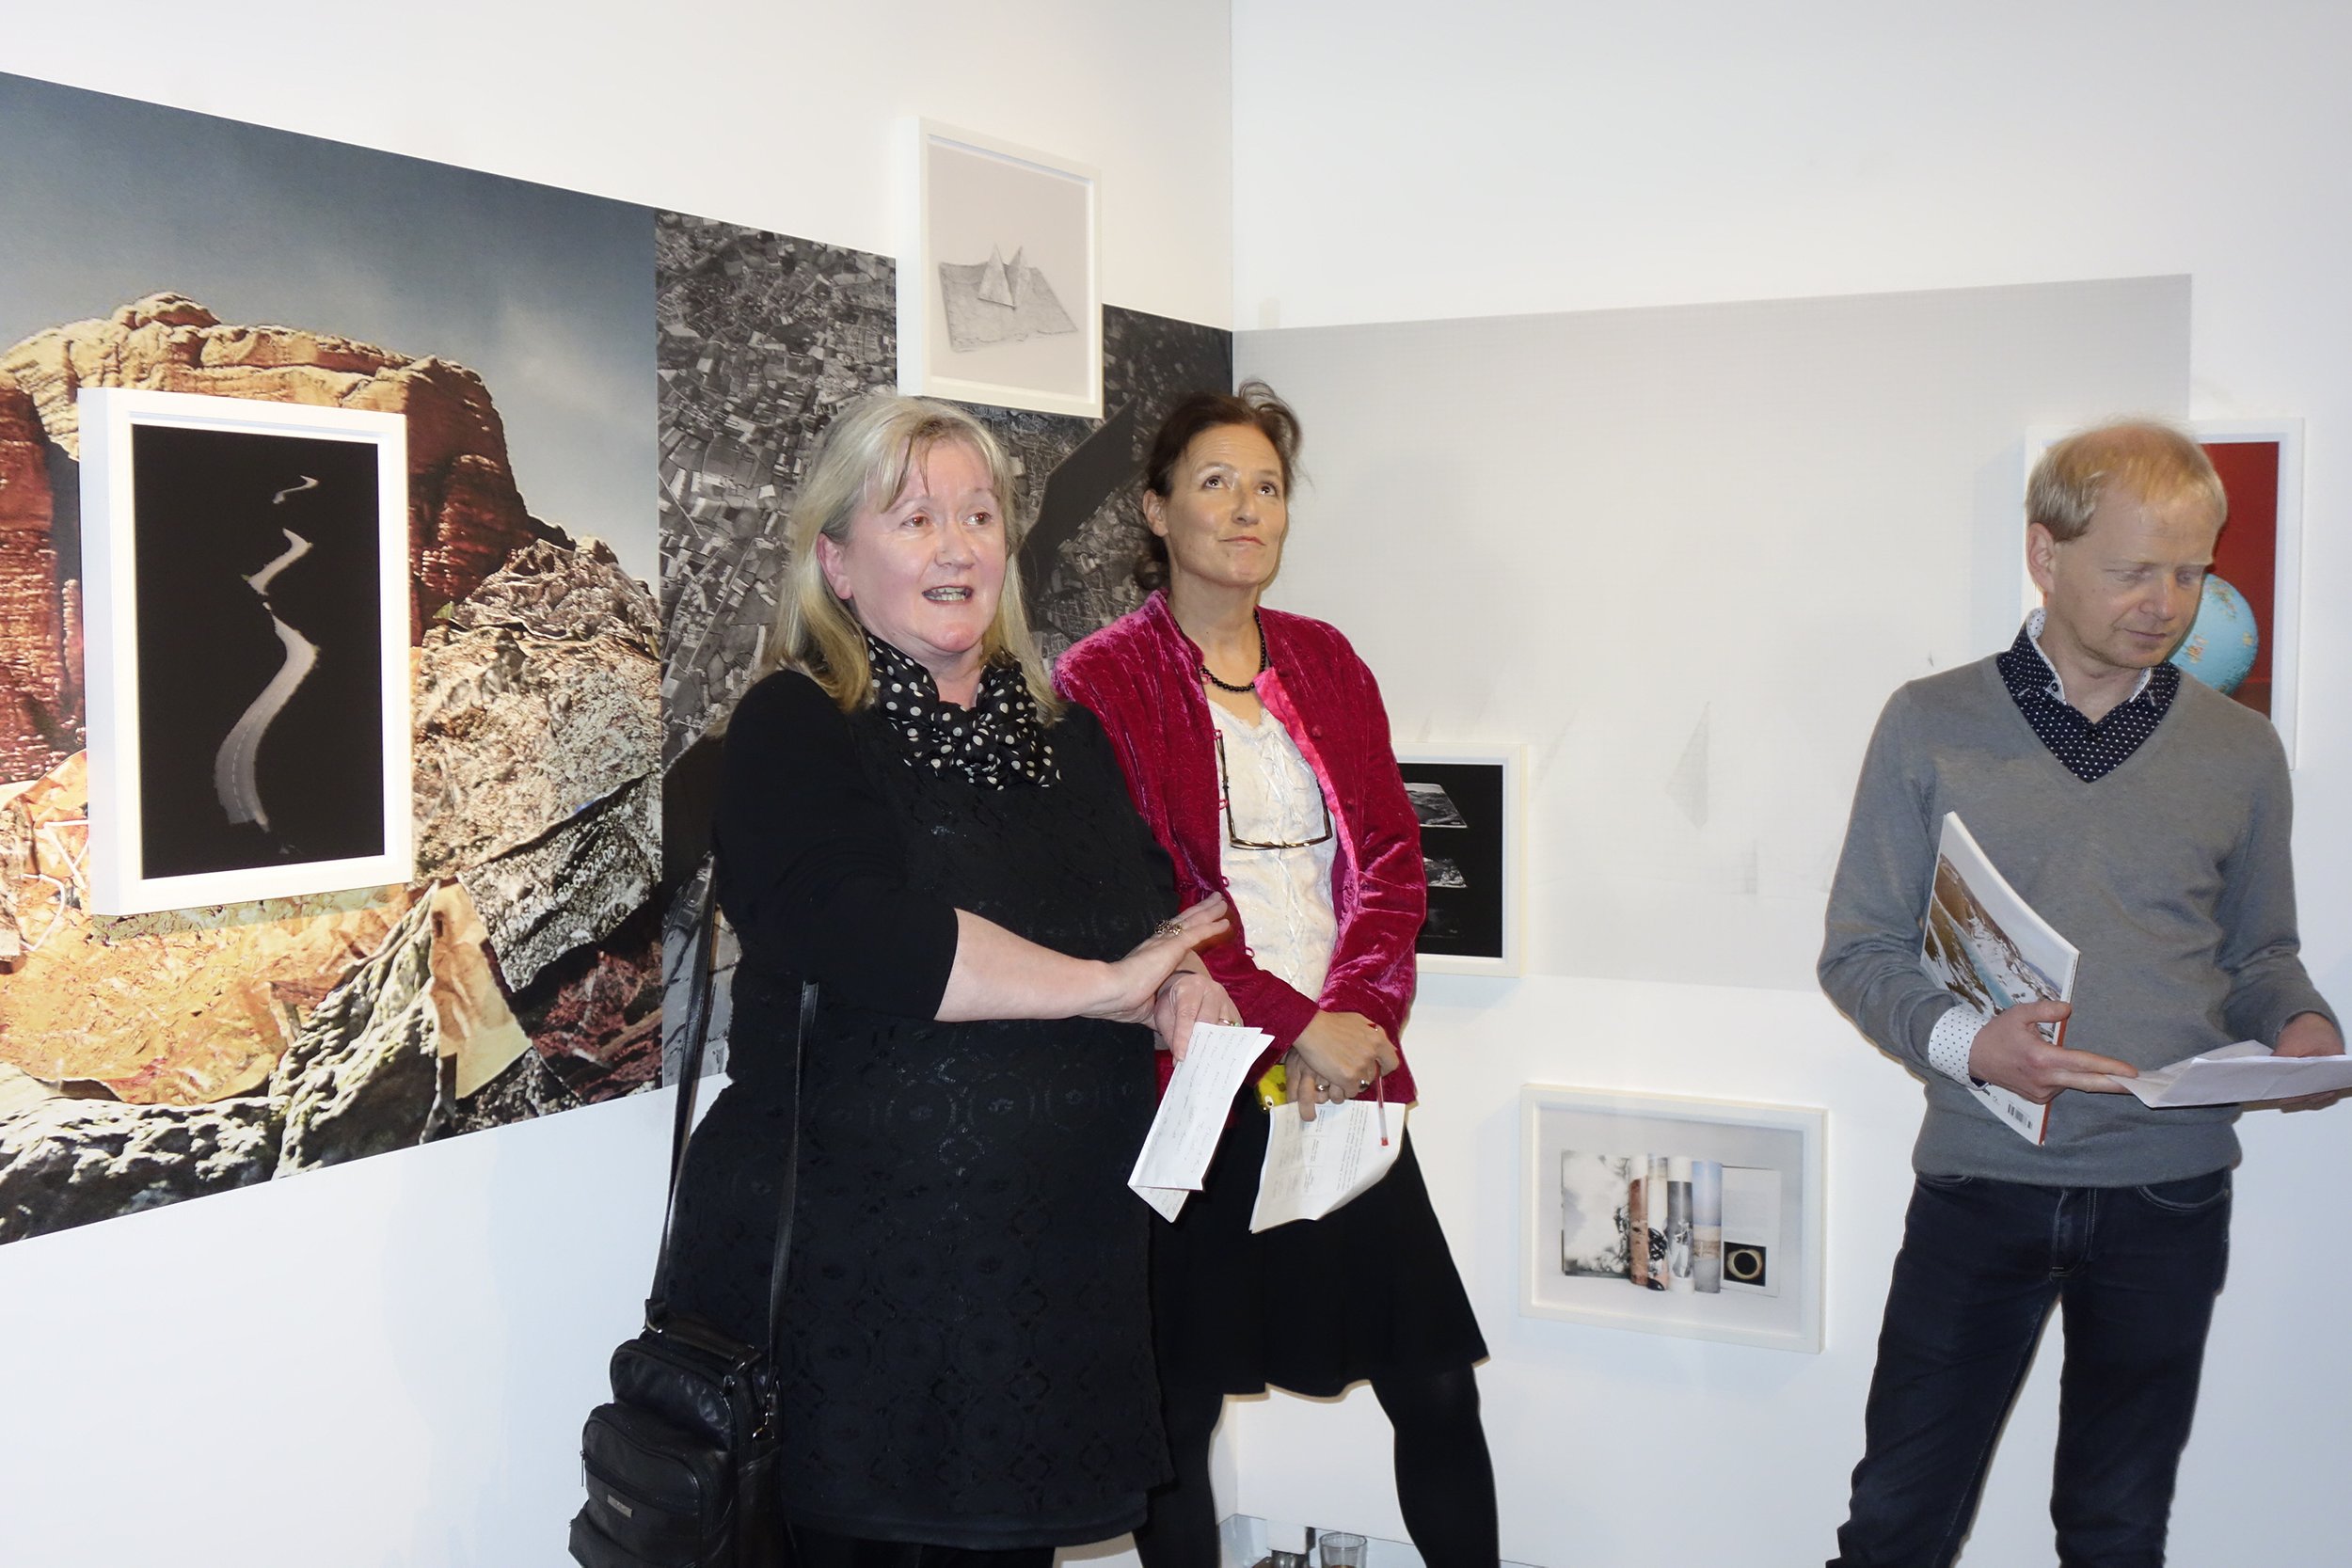  Chairperson of the Gallery Stephanie McBride, Curator Tanya Kiang &amp; Source Editor John Duncan  